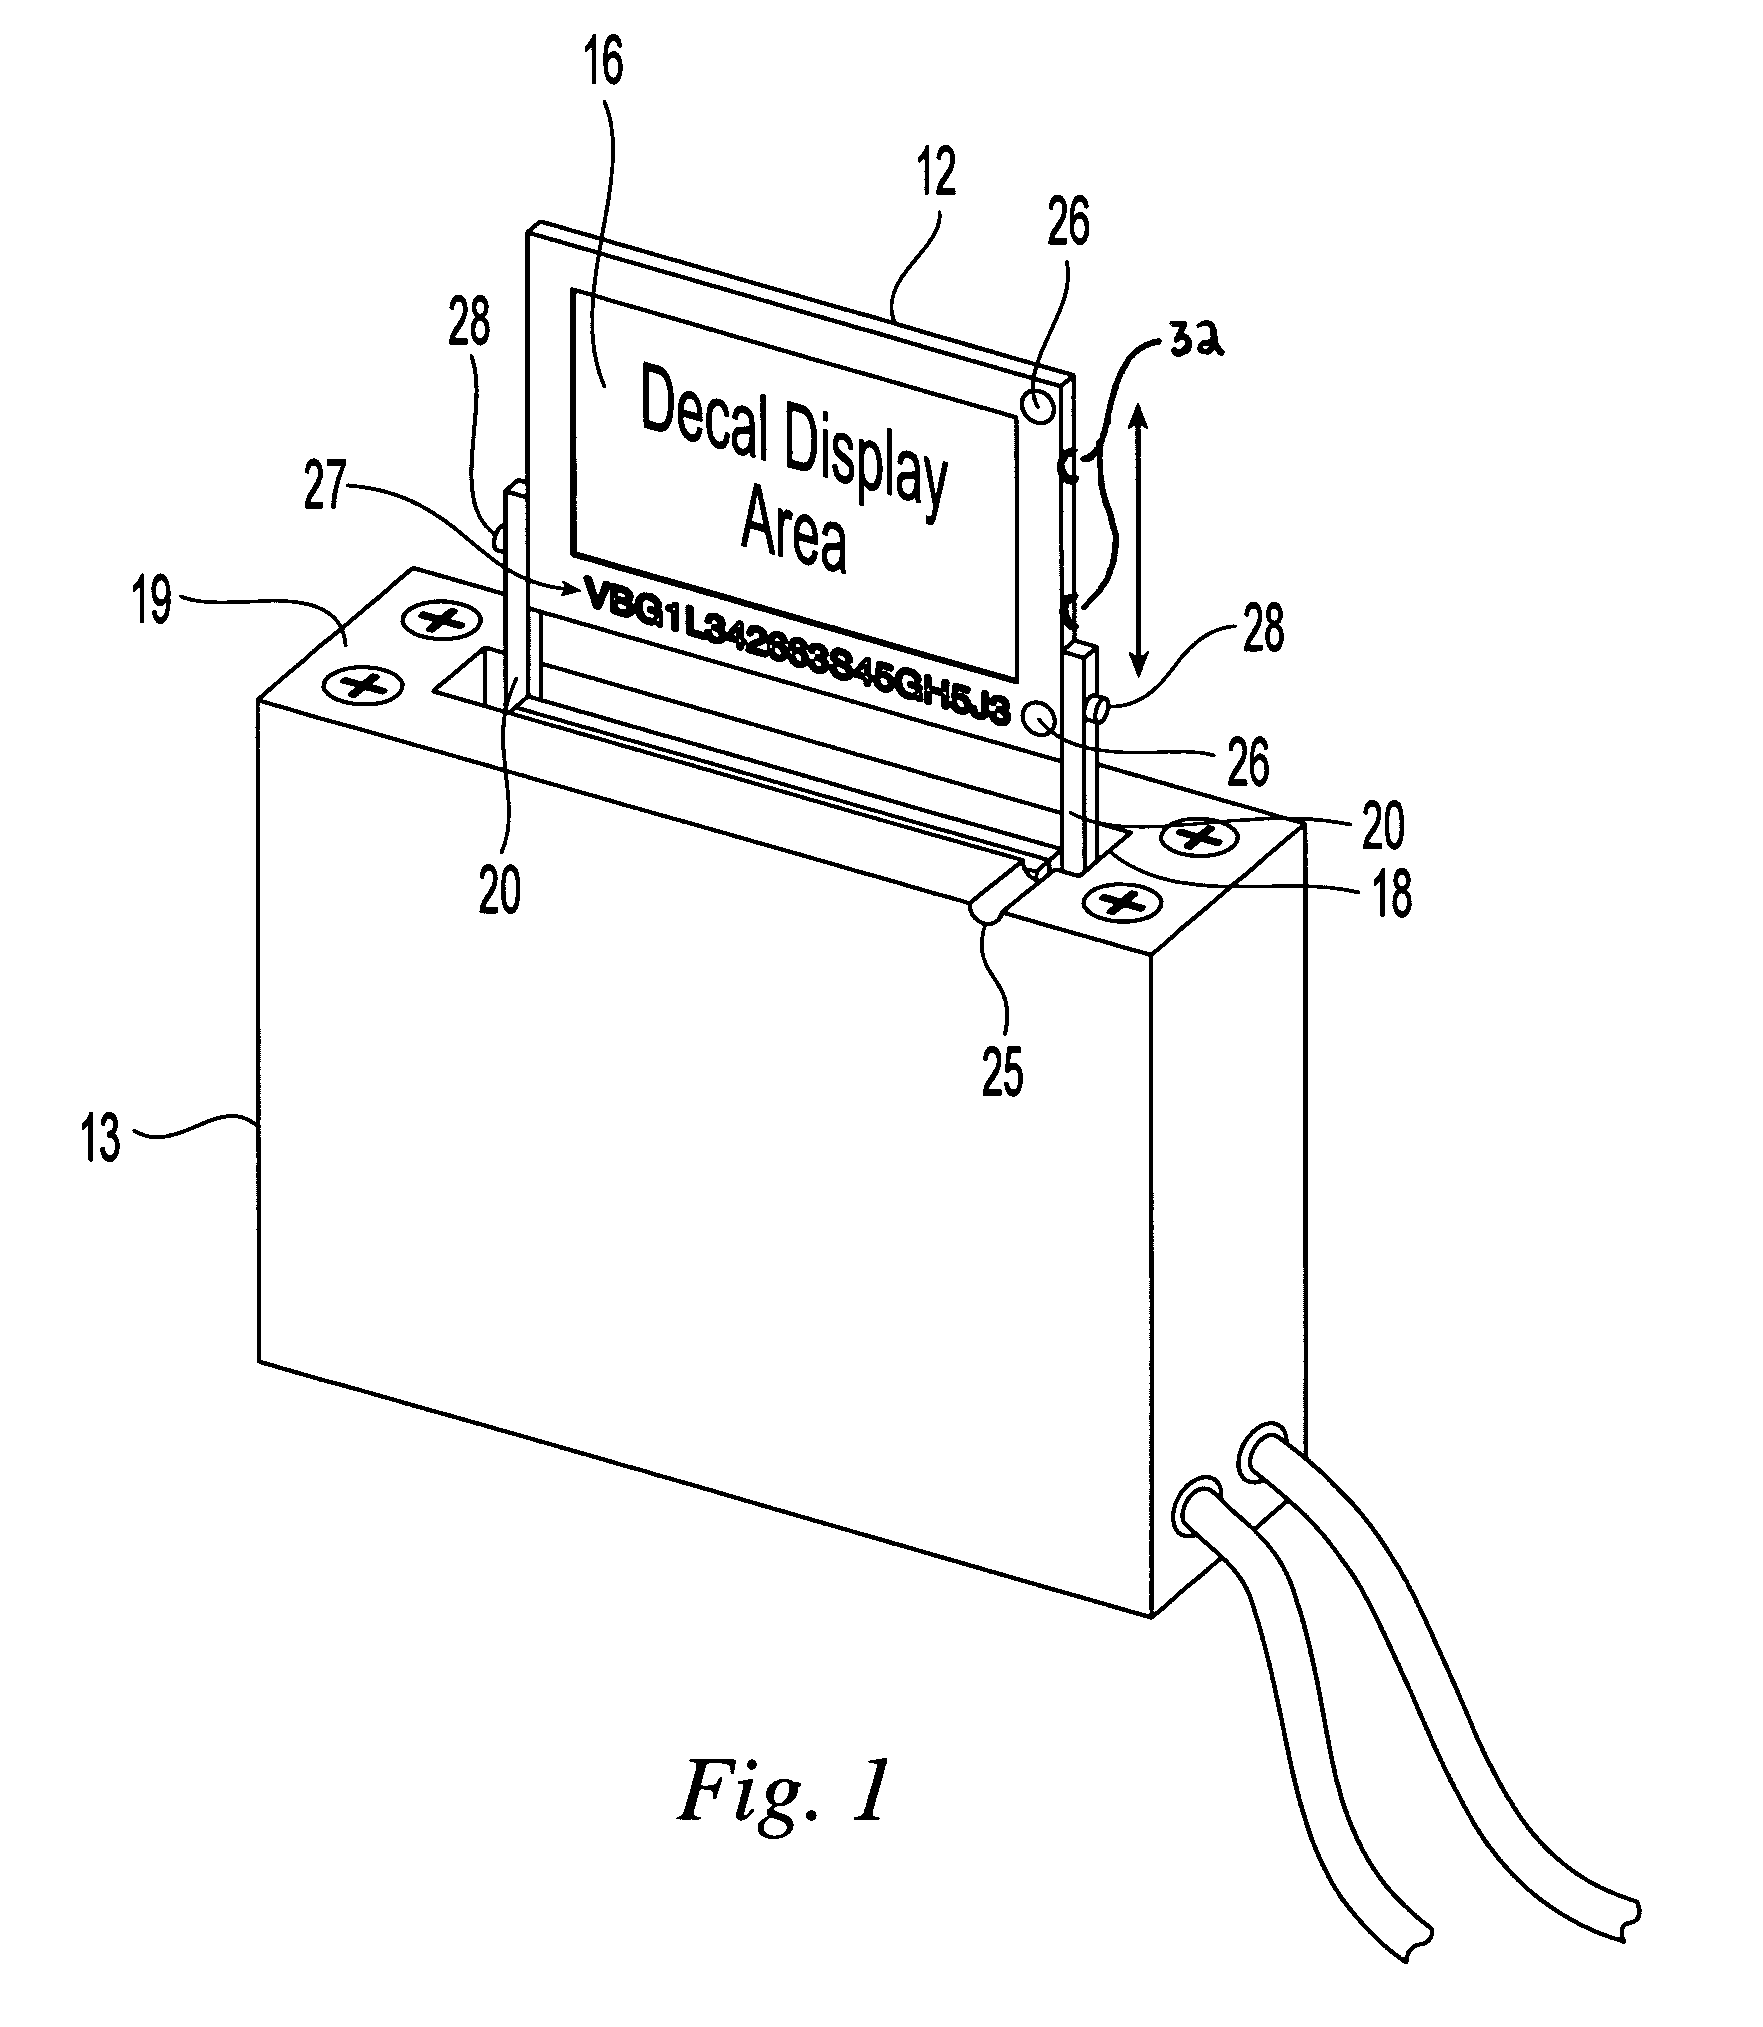 Motor vehicle decal display system